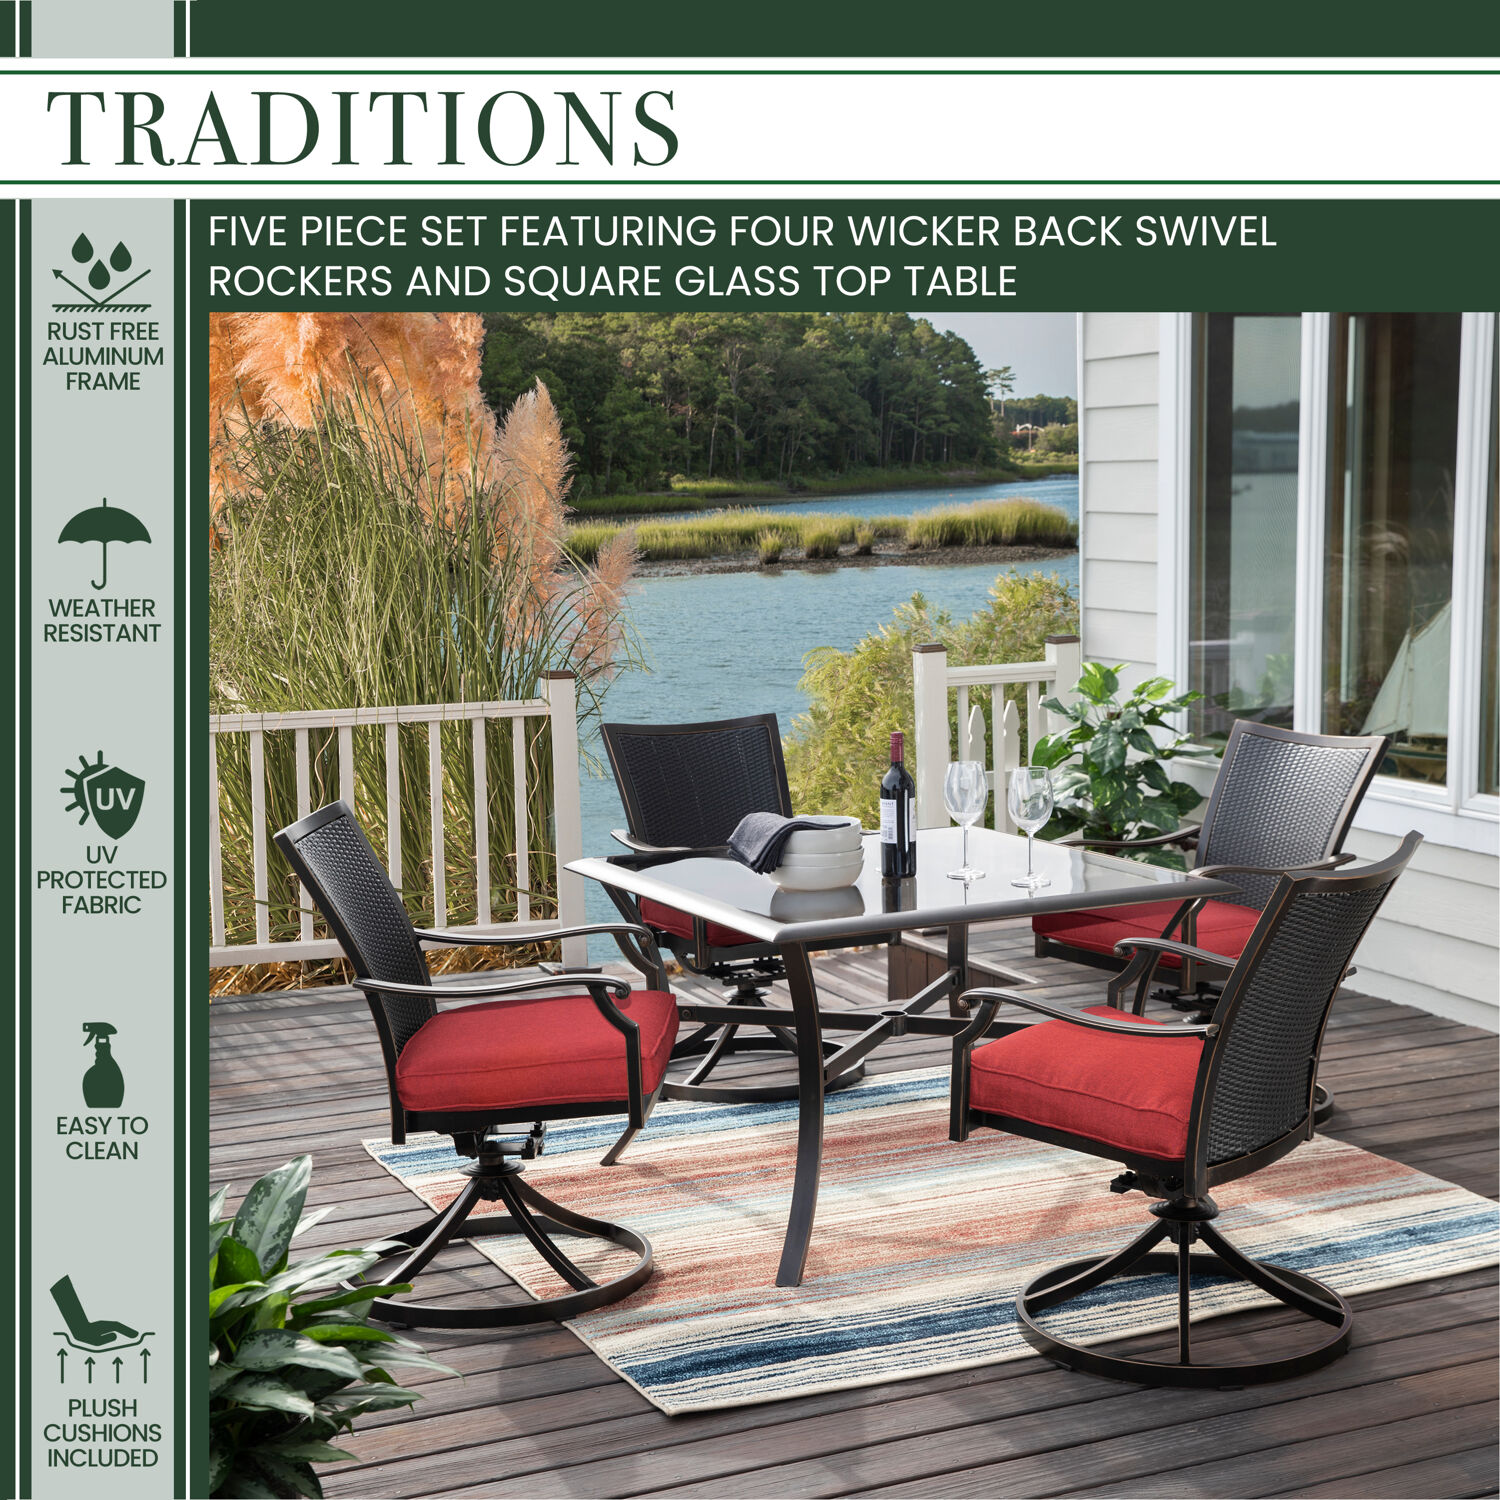 Hanover Traditions 5-Piece Outdoor Furniture Patio Dining Set, 4 Cushioned Wicker Back Cast Aluminum Swivel Rocker Chairs and 42" Square Glass Table, - image 3 of 9